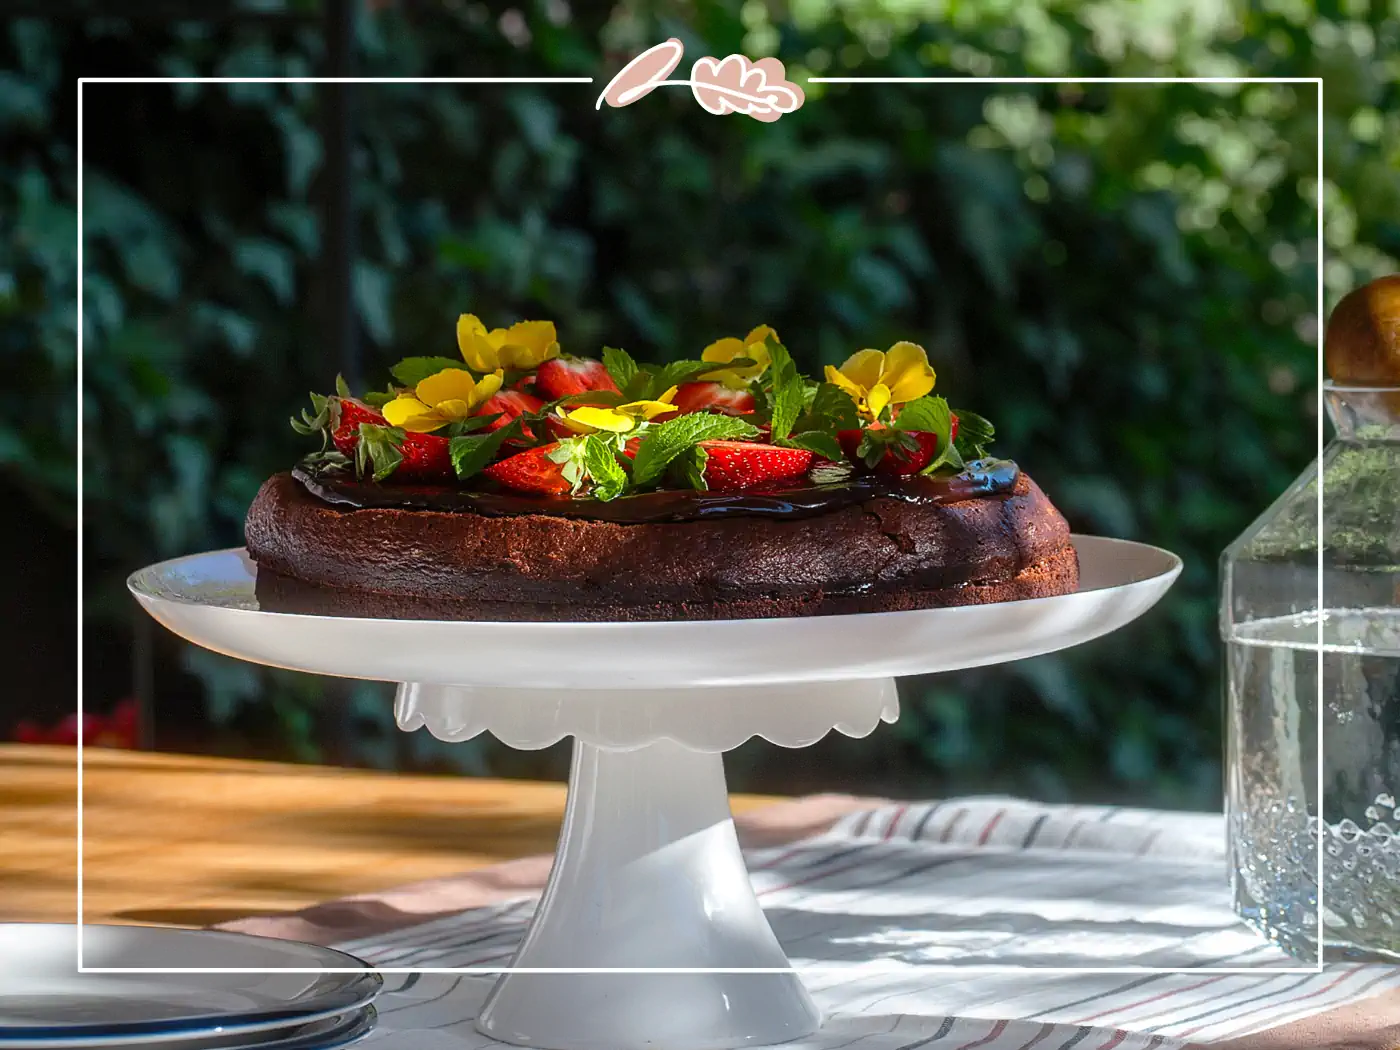 Chocolate cake topped with fresh strawberries and edible flowers on a cake stand. Fabulous Flowers and Gifts.